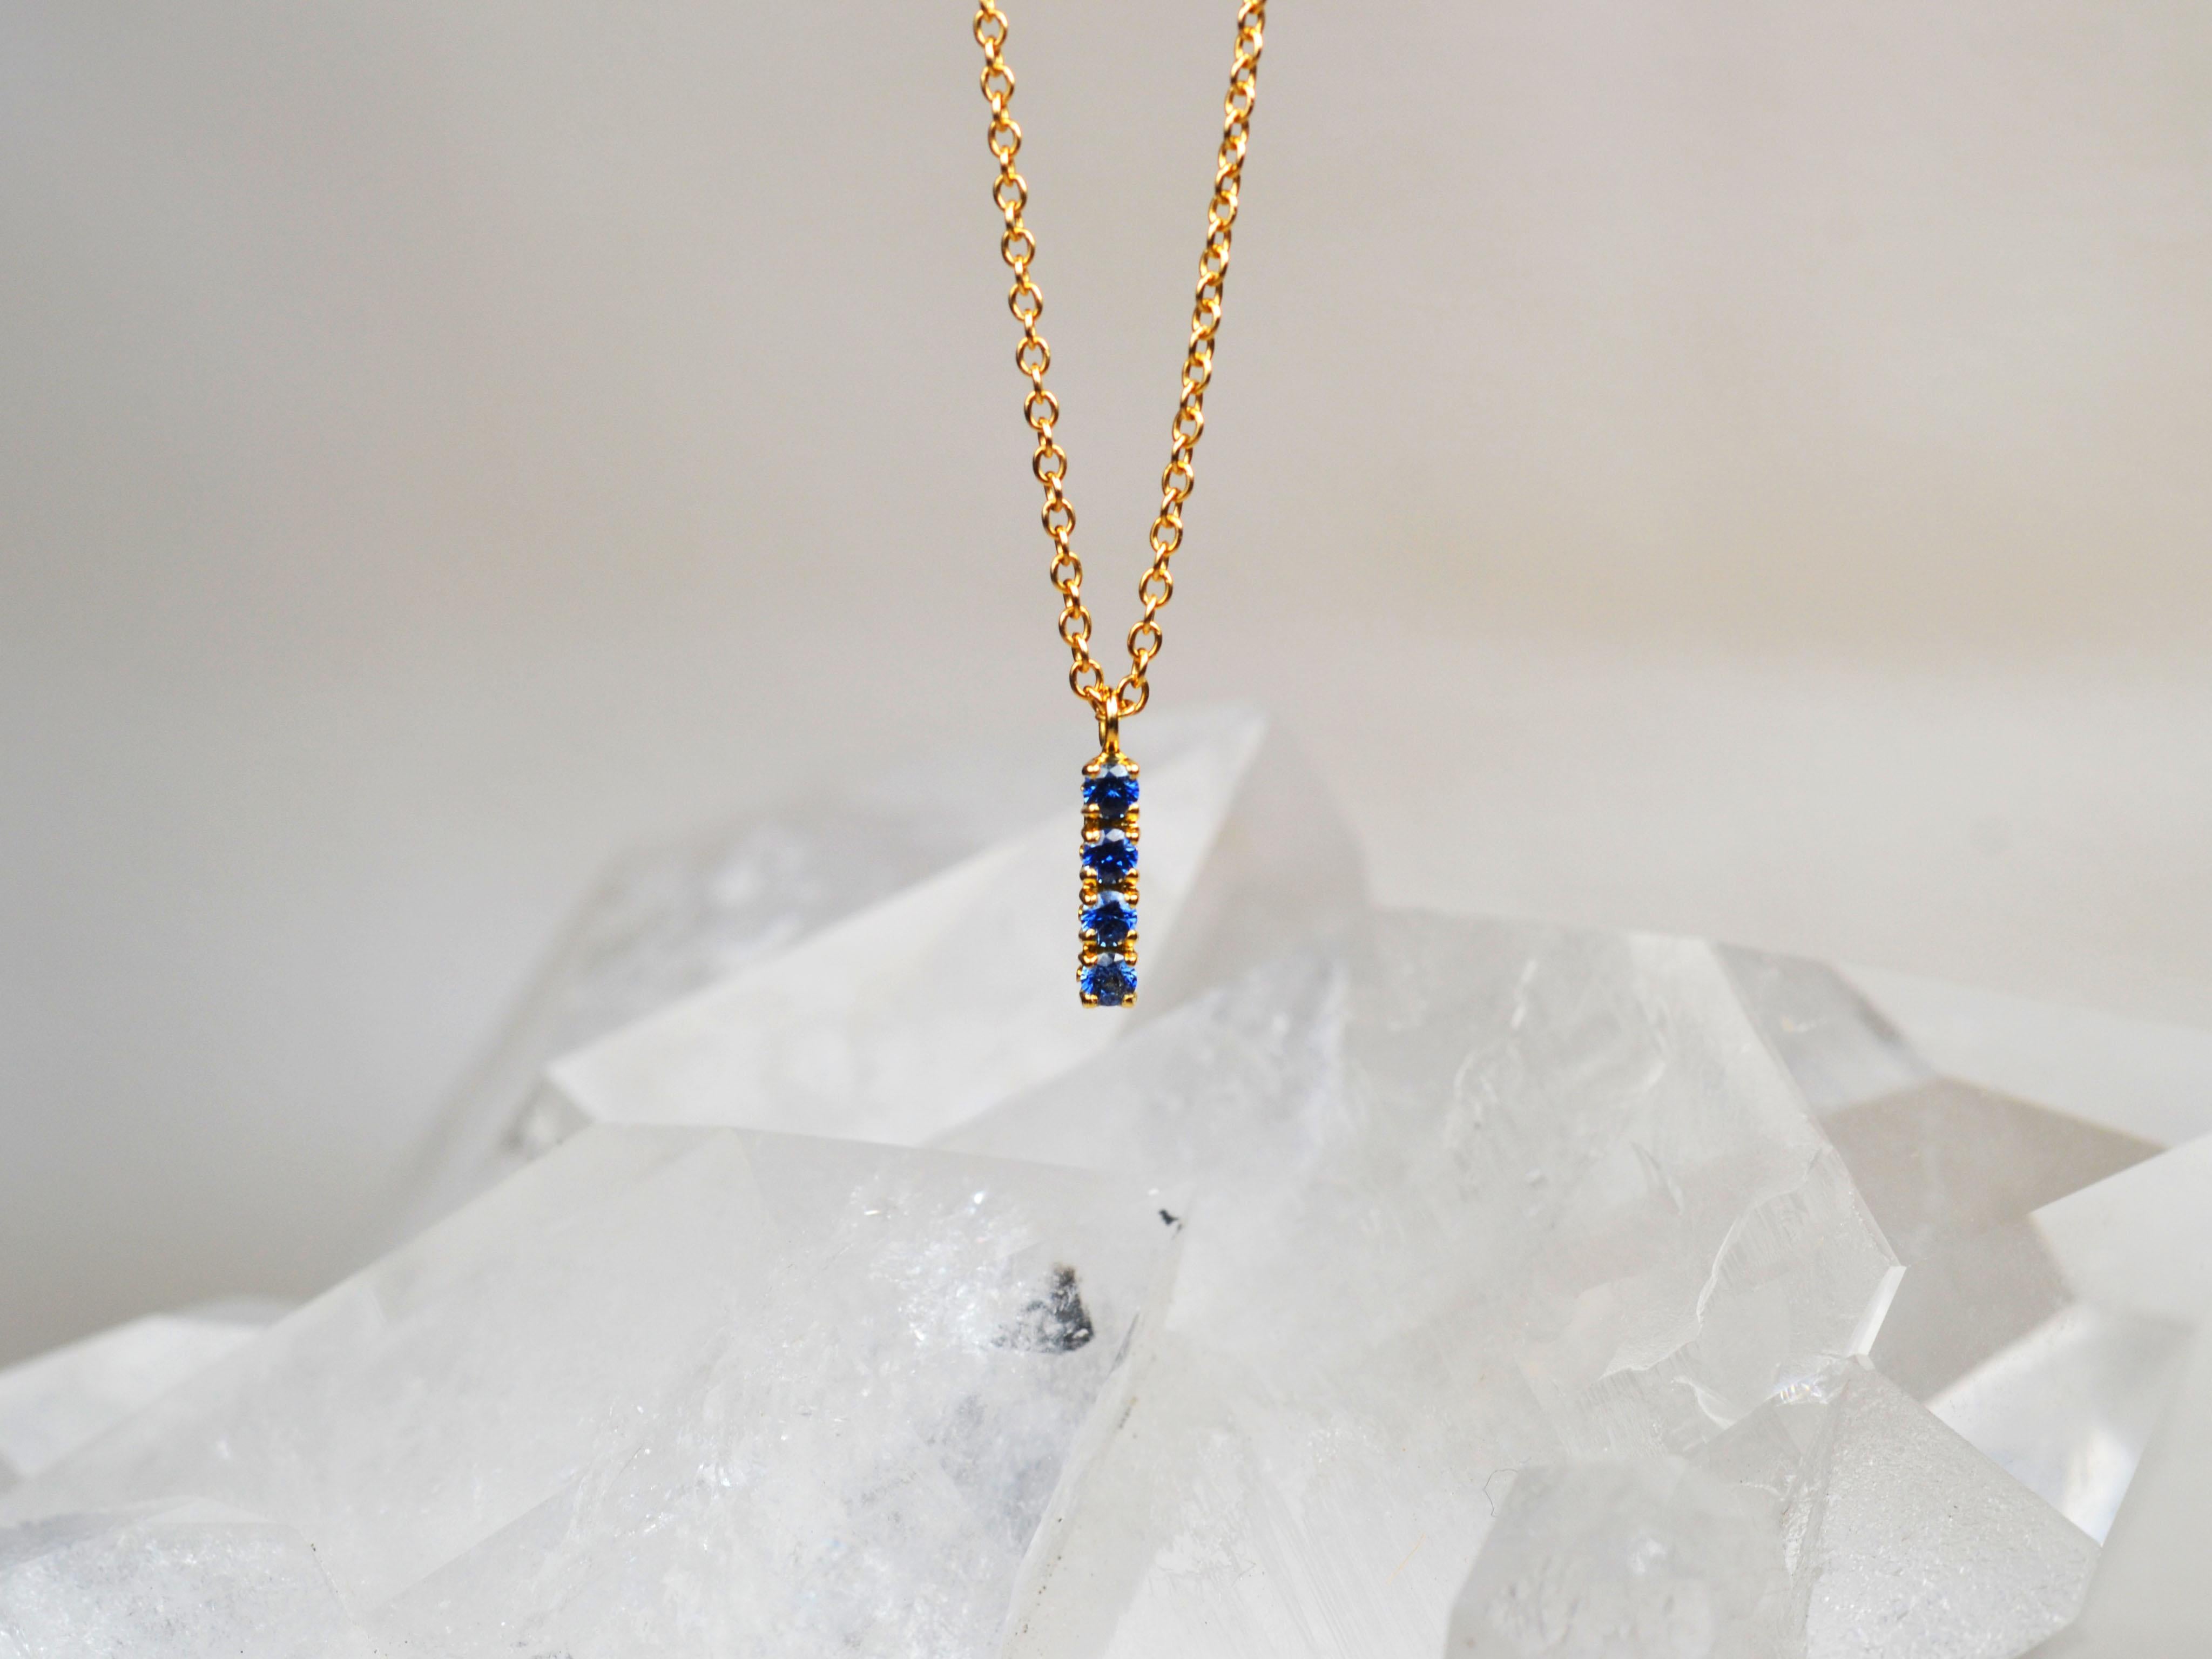 Dazzling 18k yellow gold short blue sapphire pendant from our Blossom collection. Perfect to add a splash of colour to your day and outfit. For a minimal look you can wear it solo or together with our Blossom earring studs and eternity band. We have